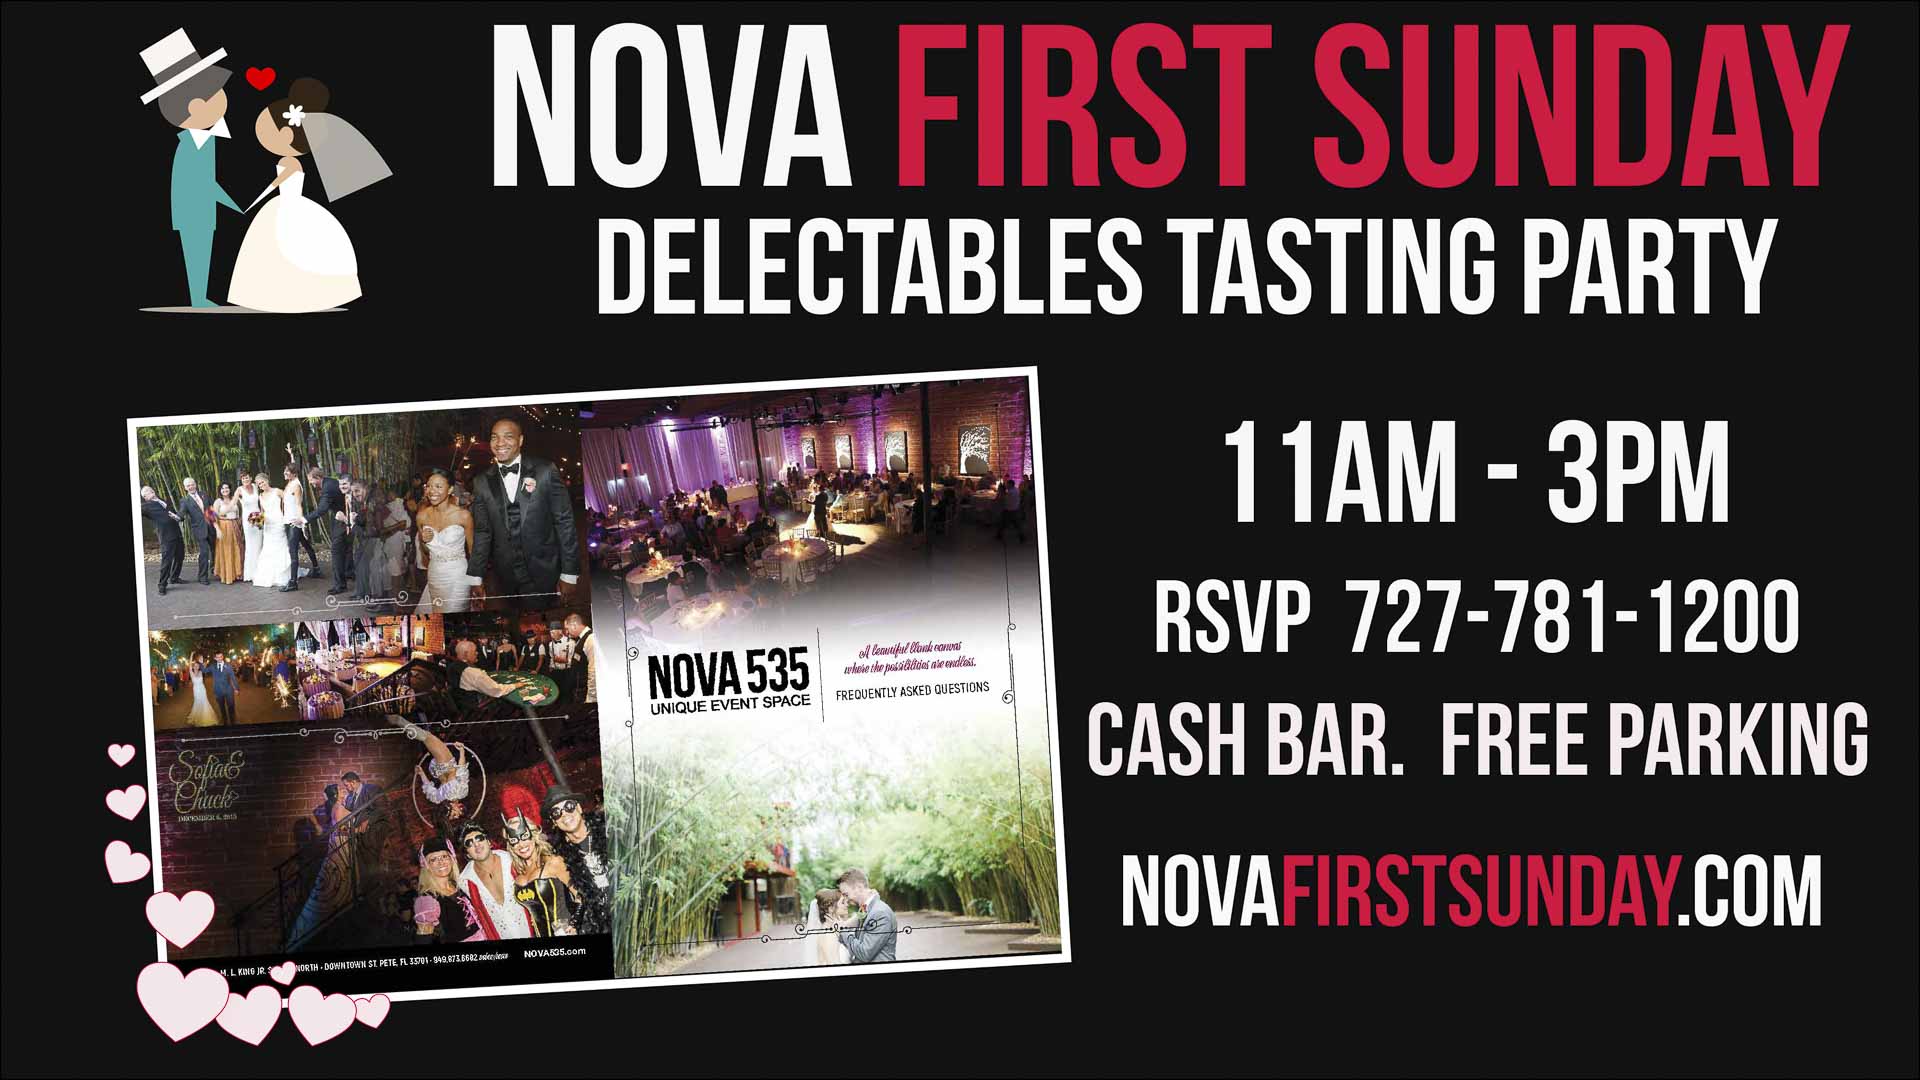 Every First Sunday (except July) 11am-3pm at Historic Downtown St. Pete Venue NOVA 535 Delectables Catering hosts NOVA First Sunday Open House Tasting Party